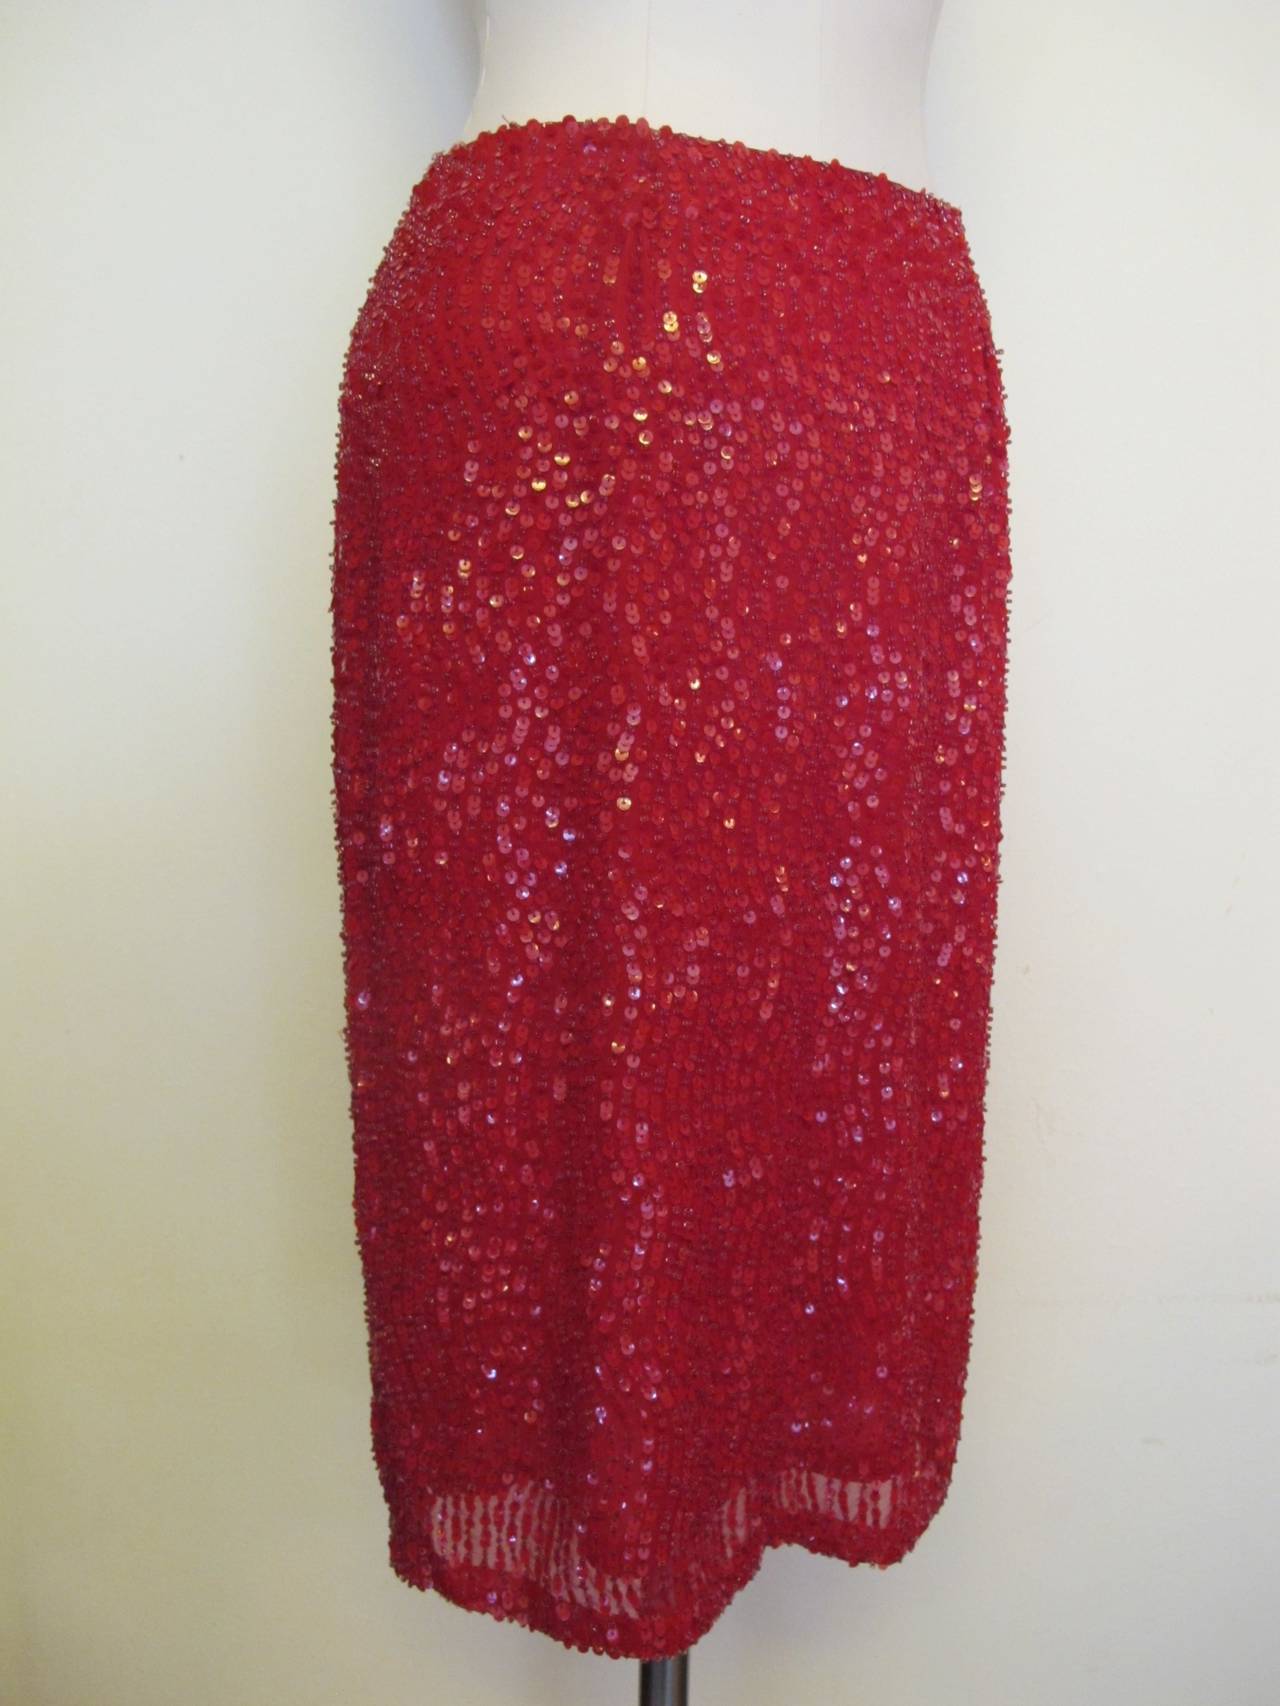 Chic red silk chiffon evening skirt totally embedded with red sequins and red beads. The fit on the body is impressive.